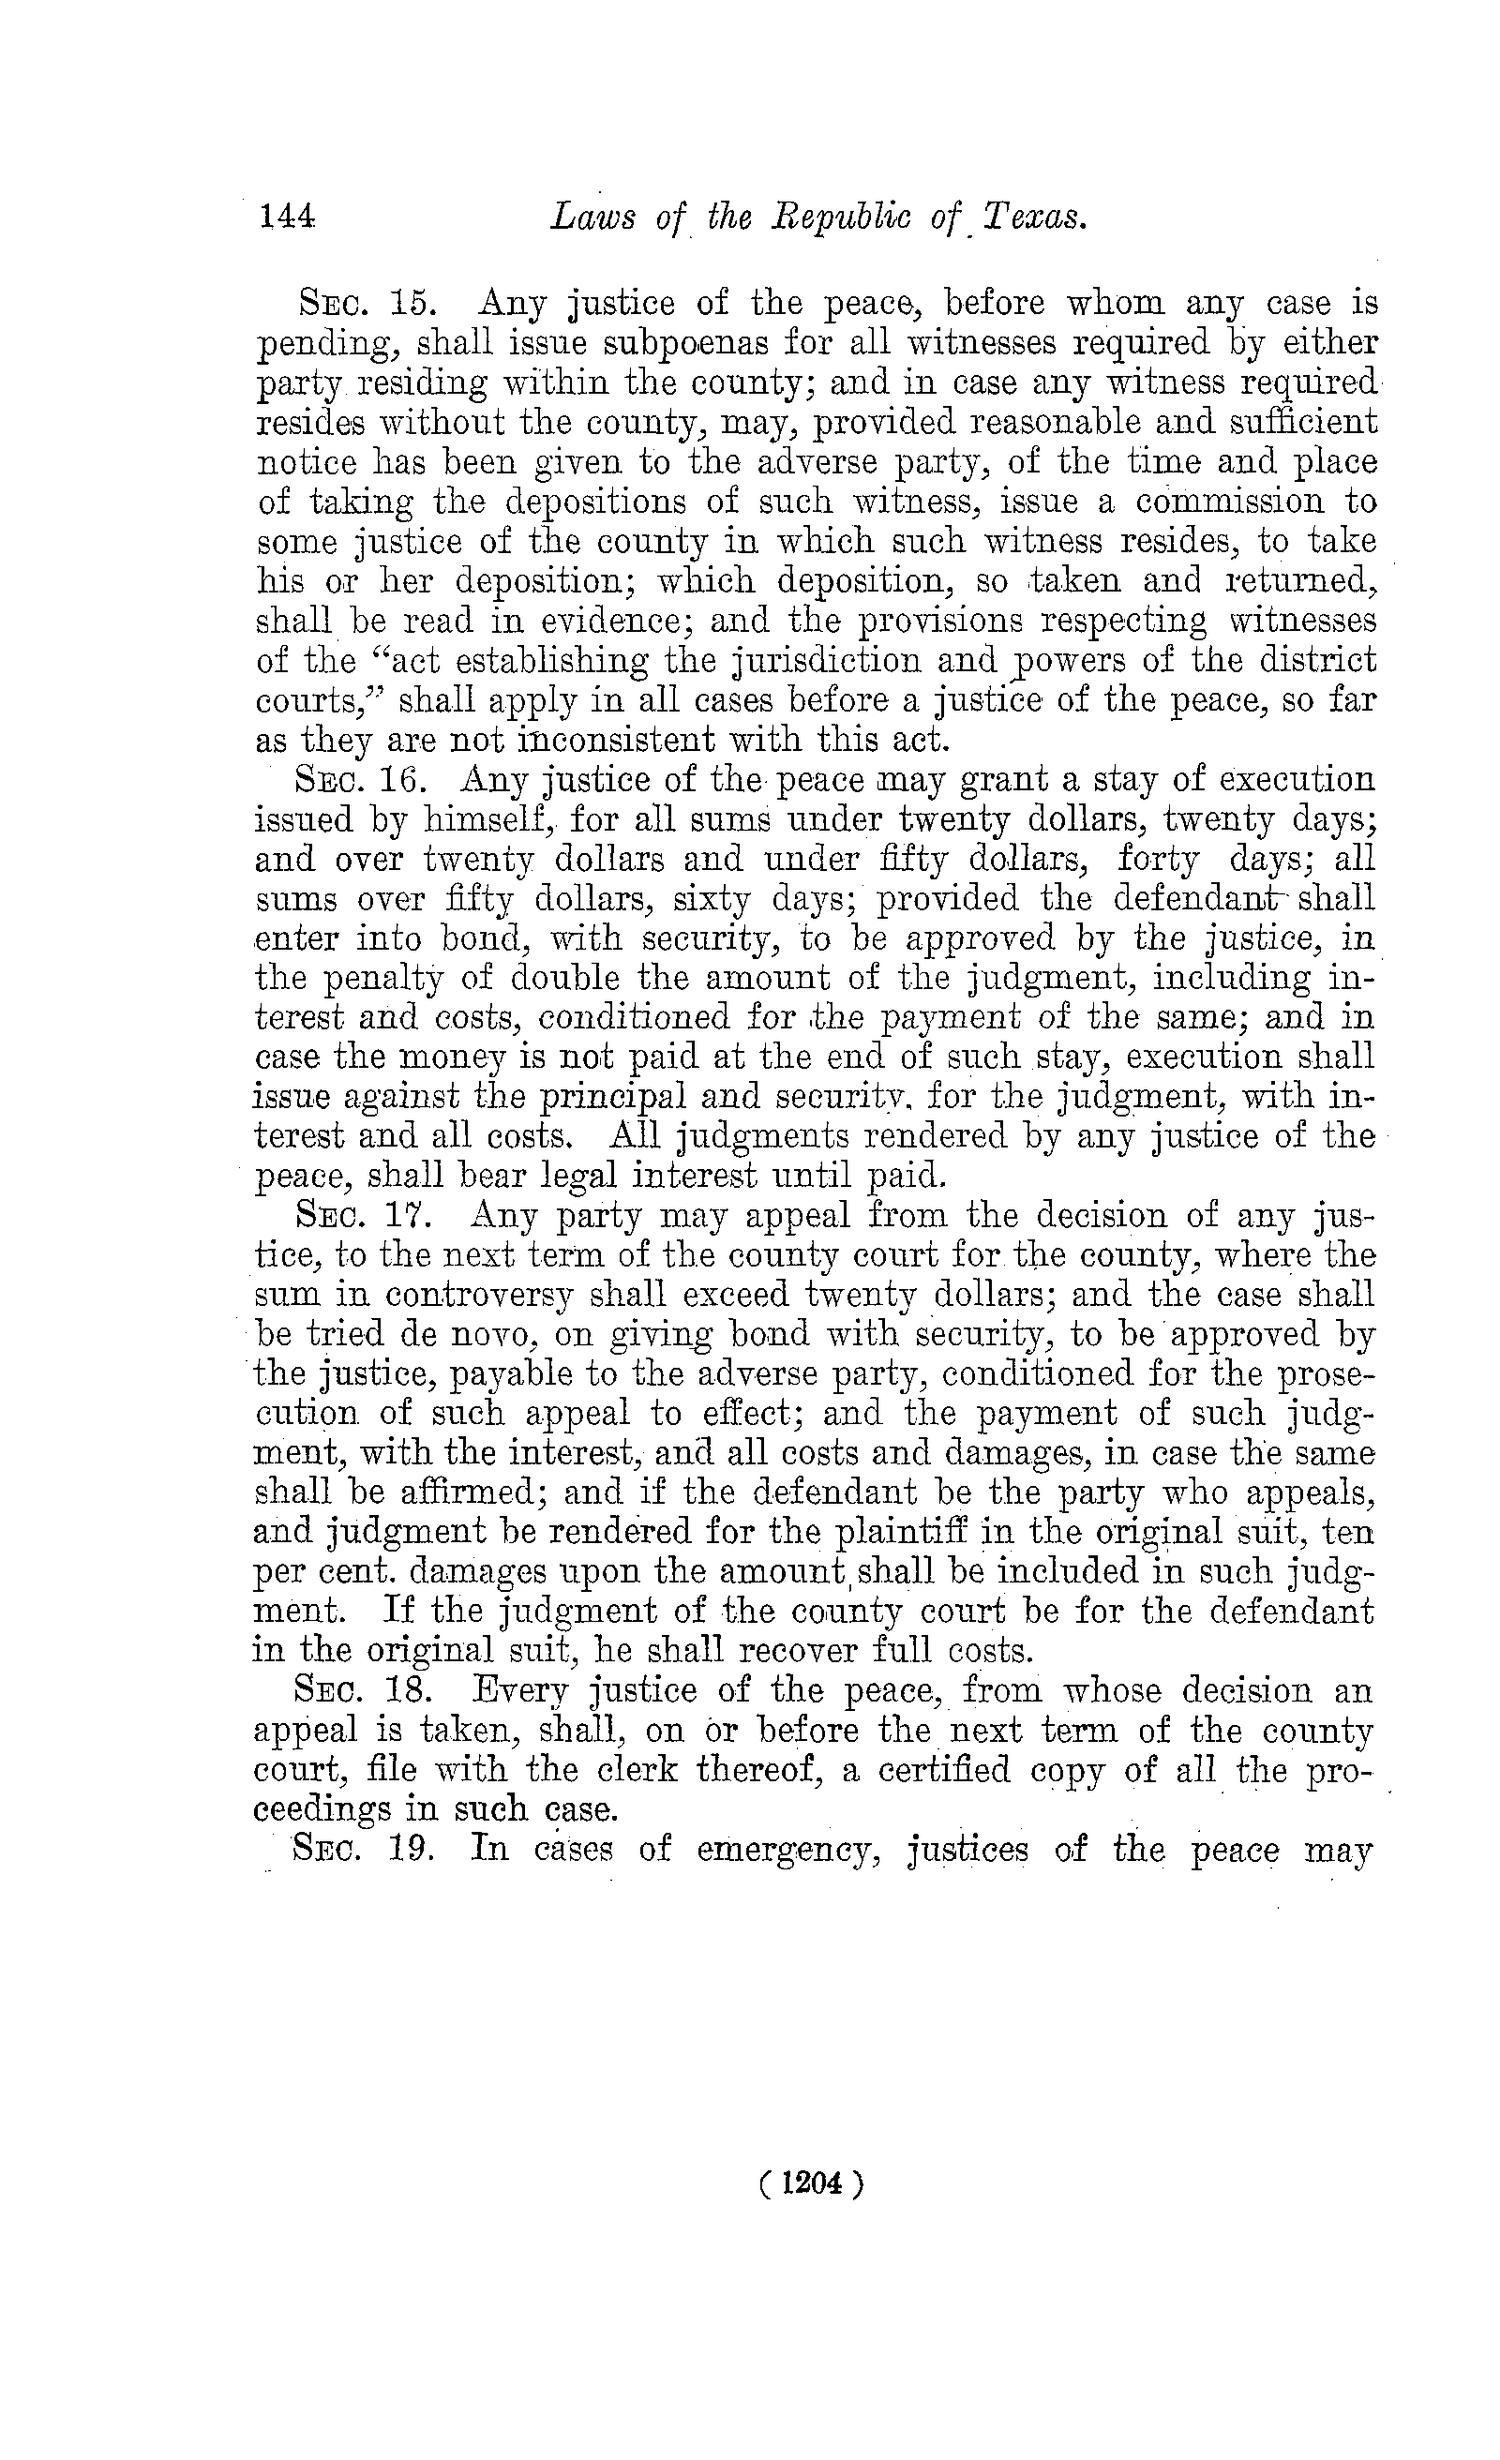 The Laws of Texas, 1822-1897 Volume 1
                                                
                                                    1204
                                                